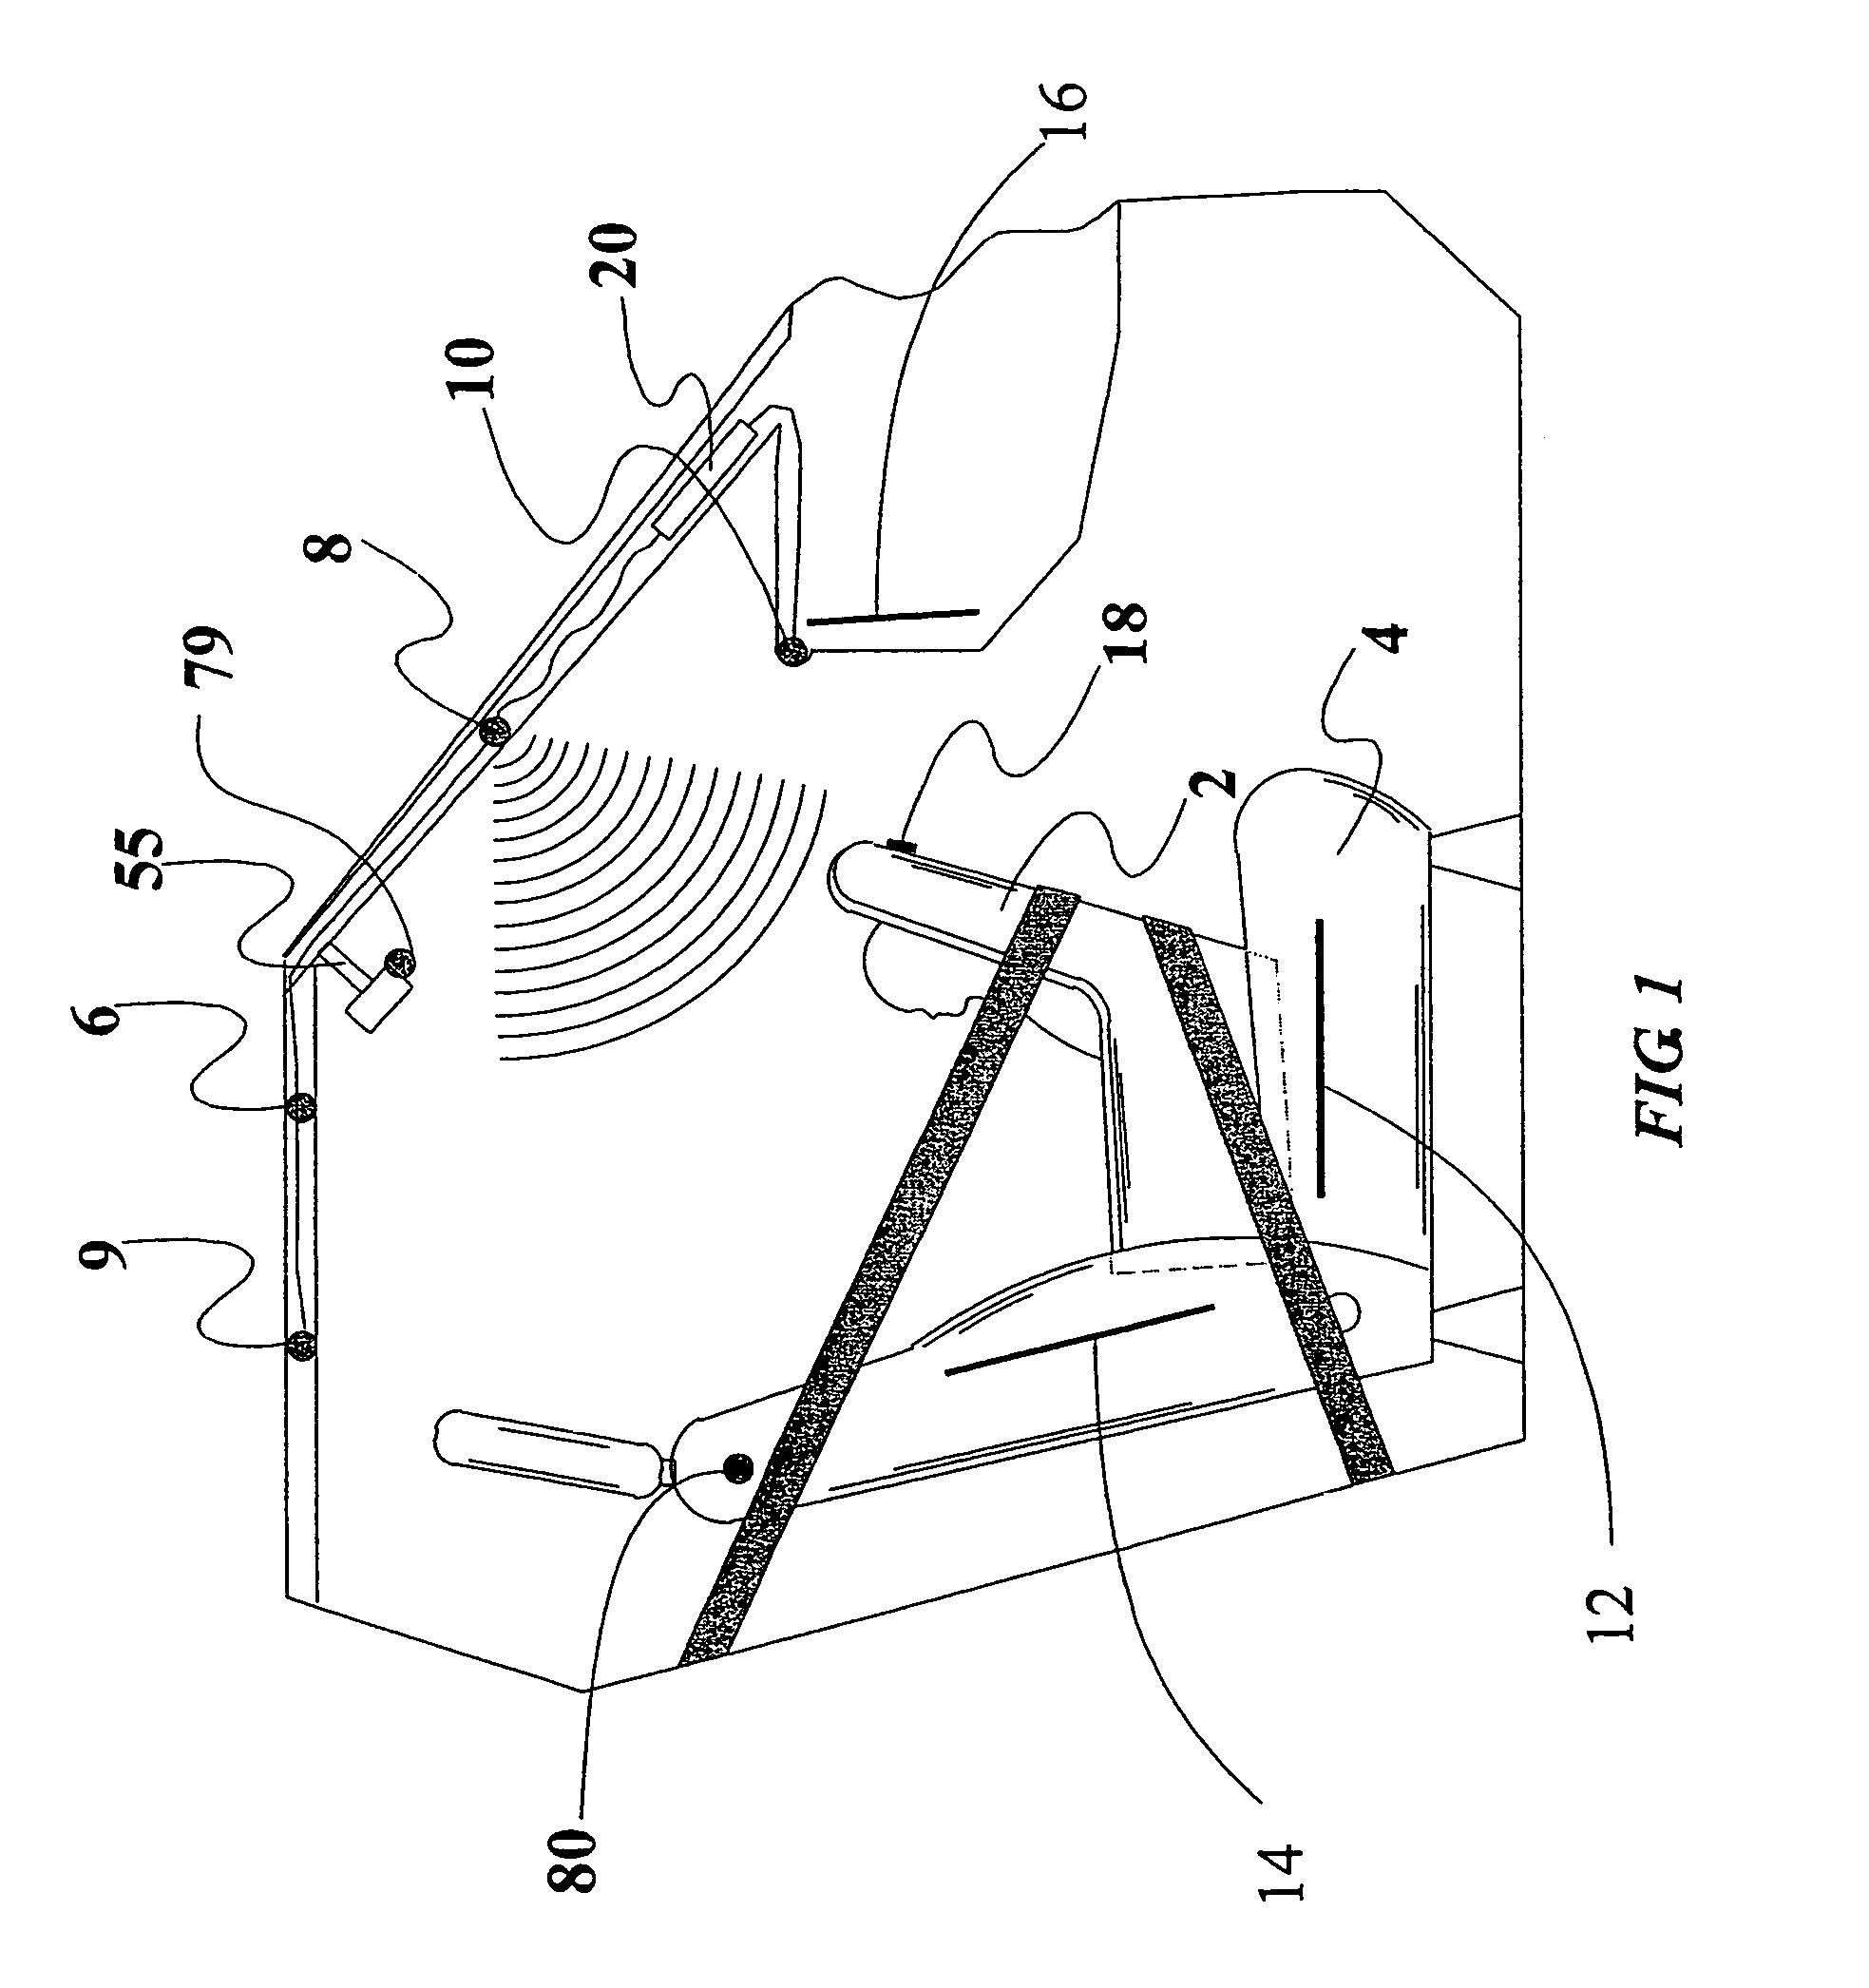 Method for airbag inflation control